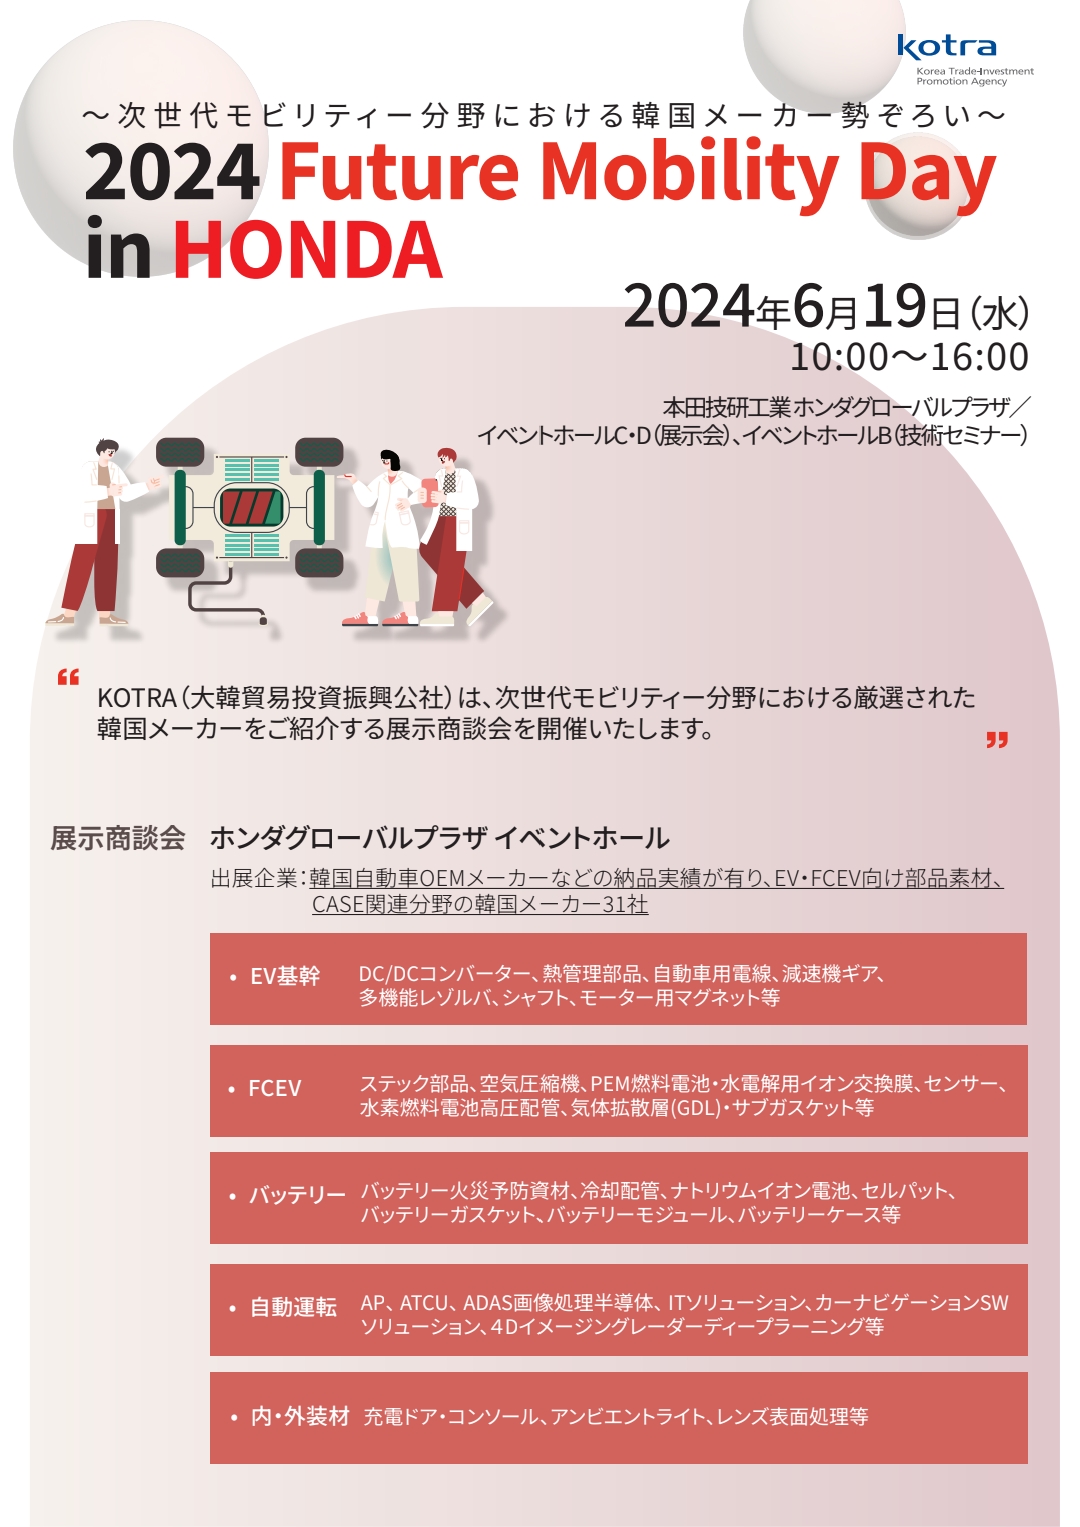 [2024 Future Mobility Day in HONDA]